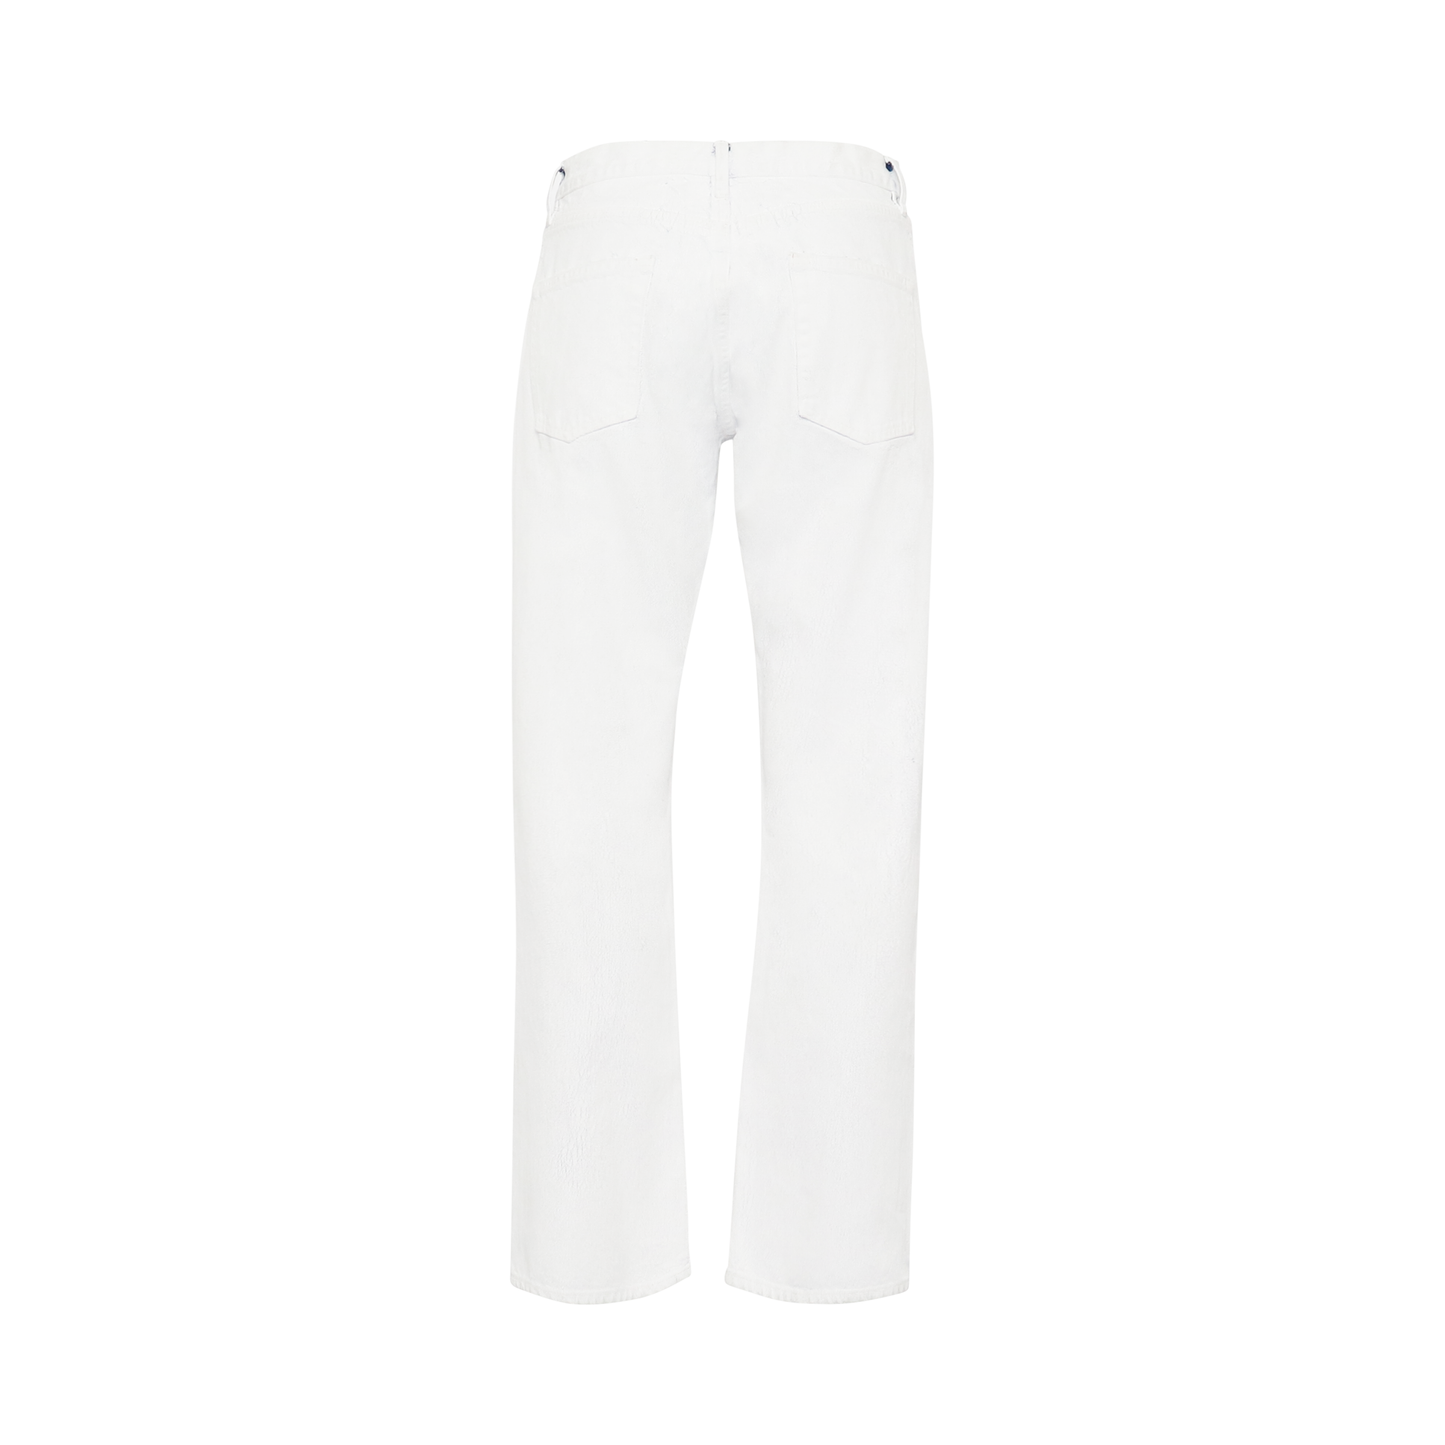 Mid Rise Straight Cut Jeans in White